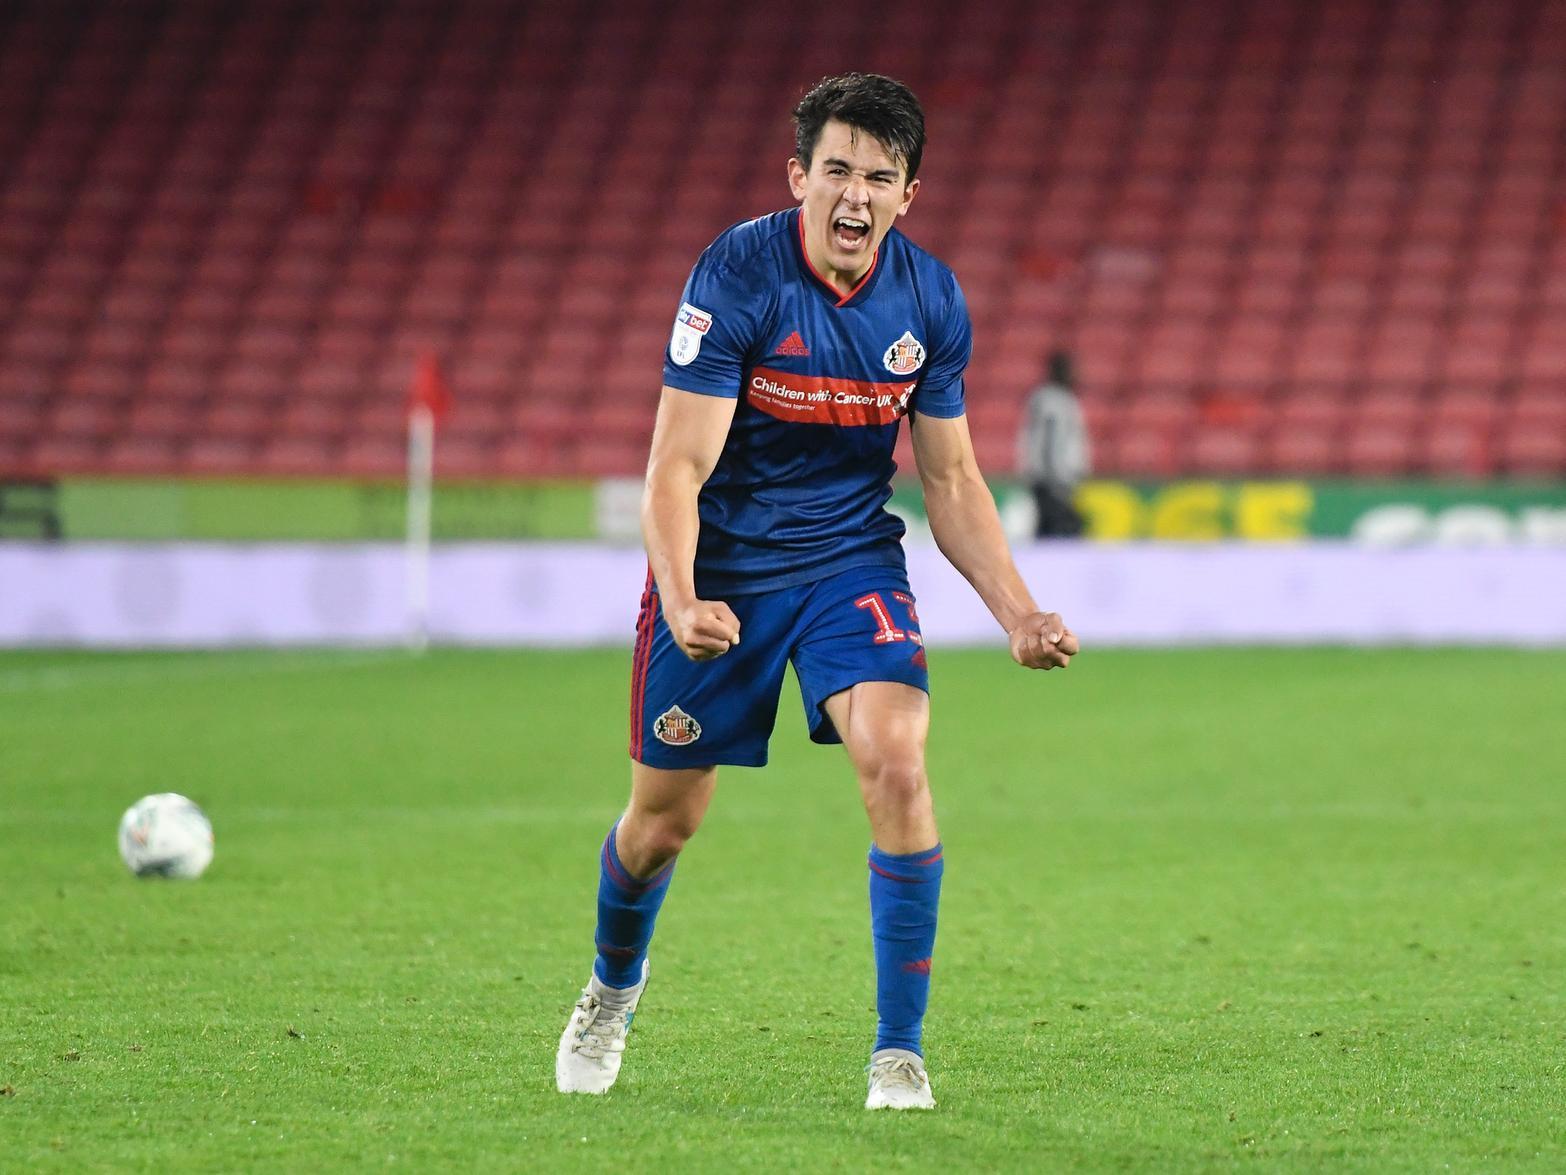 Luke ONien has pledged his long-term future to Sunderland AFC - with his deal at the Stadium of Light set to be extended. (Shields Gazette)